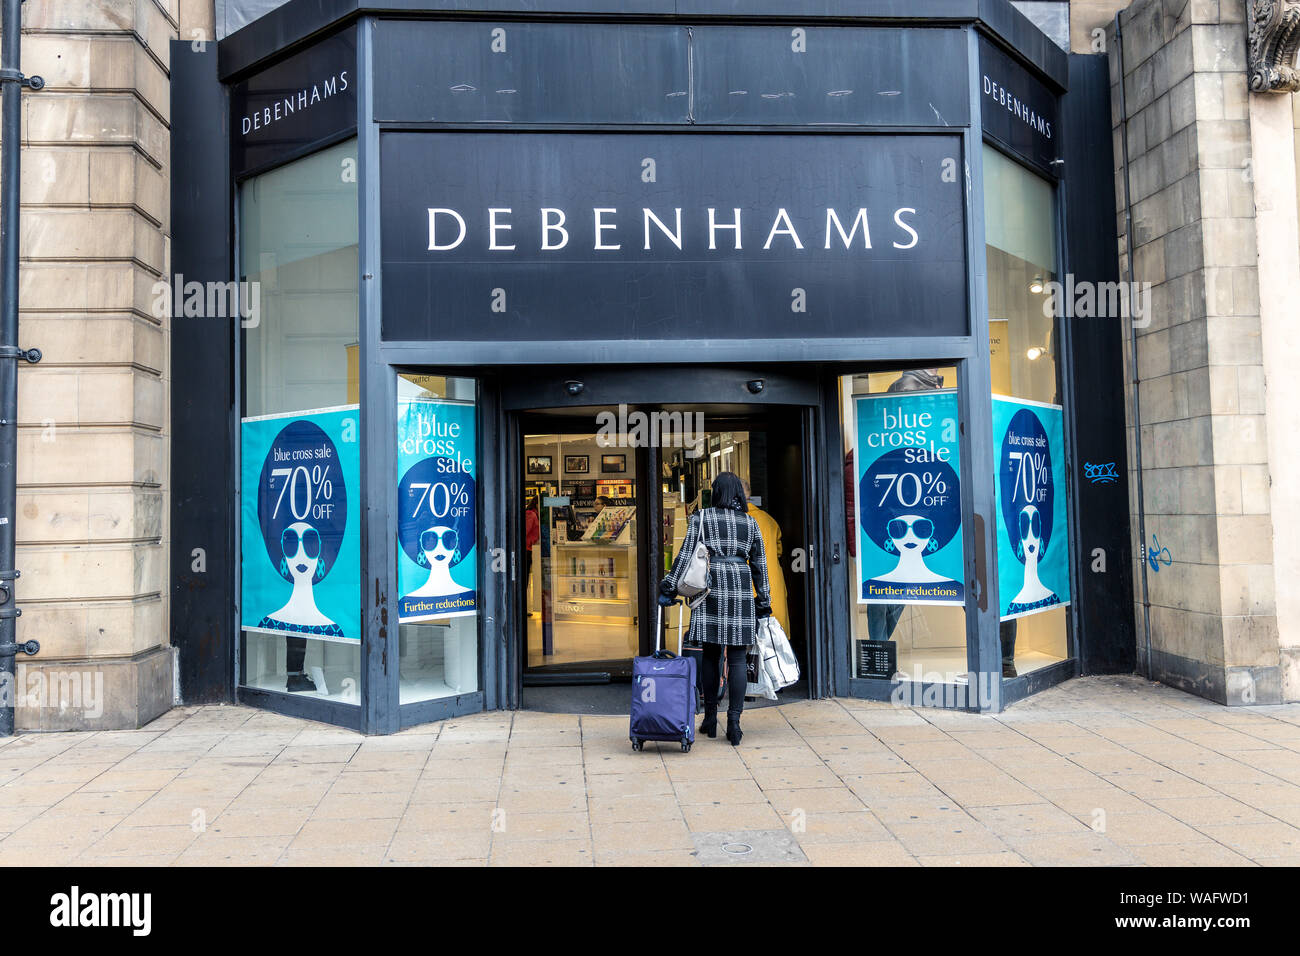 Back of Lady shopper carrying bags and wheeling a travel bag entering a Debenhams shop with large blue cross sale signs in the windows Princes Street Stock Photo